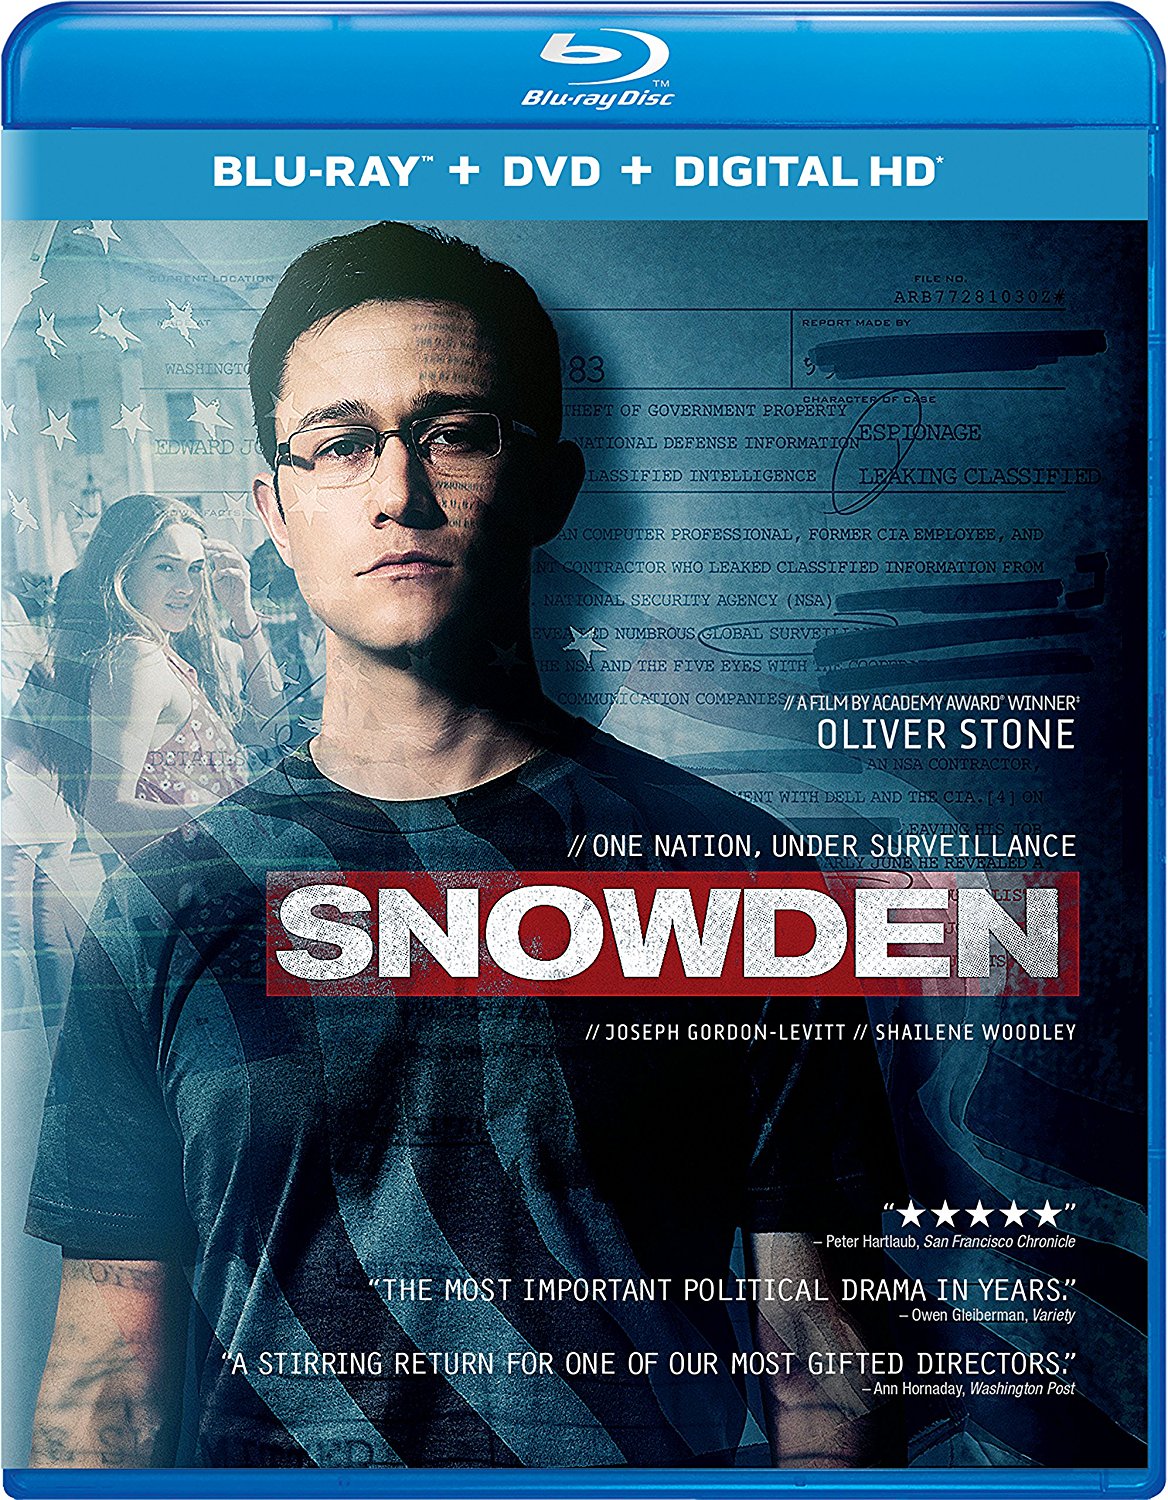 Snowden is out on DVD and Blu-ray today